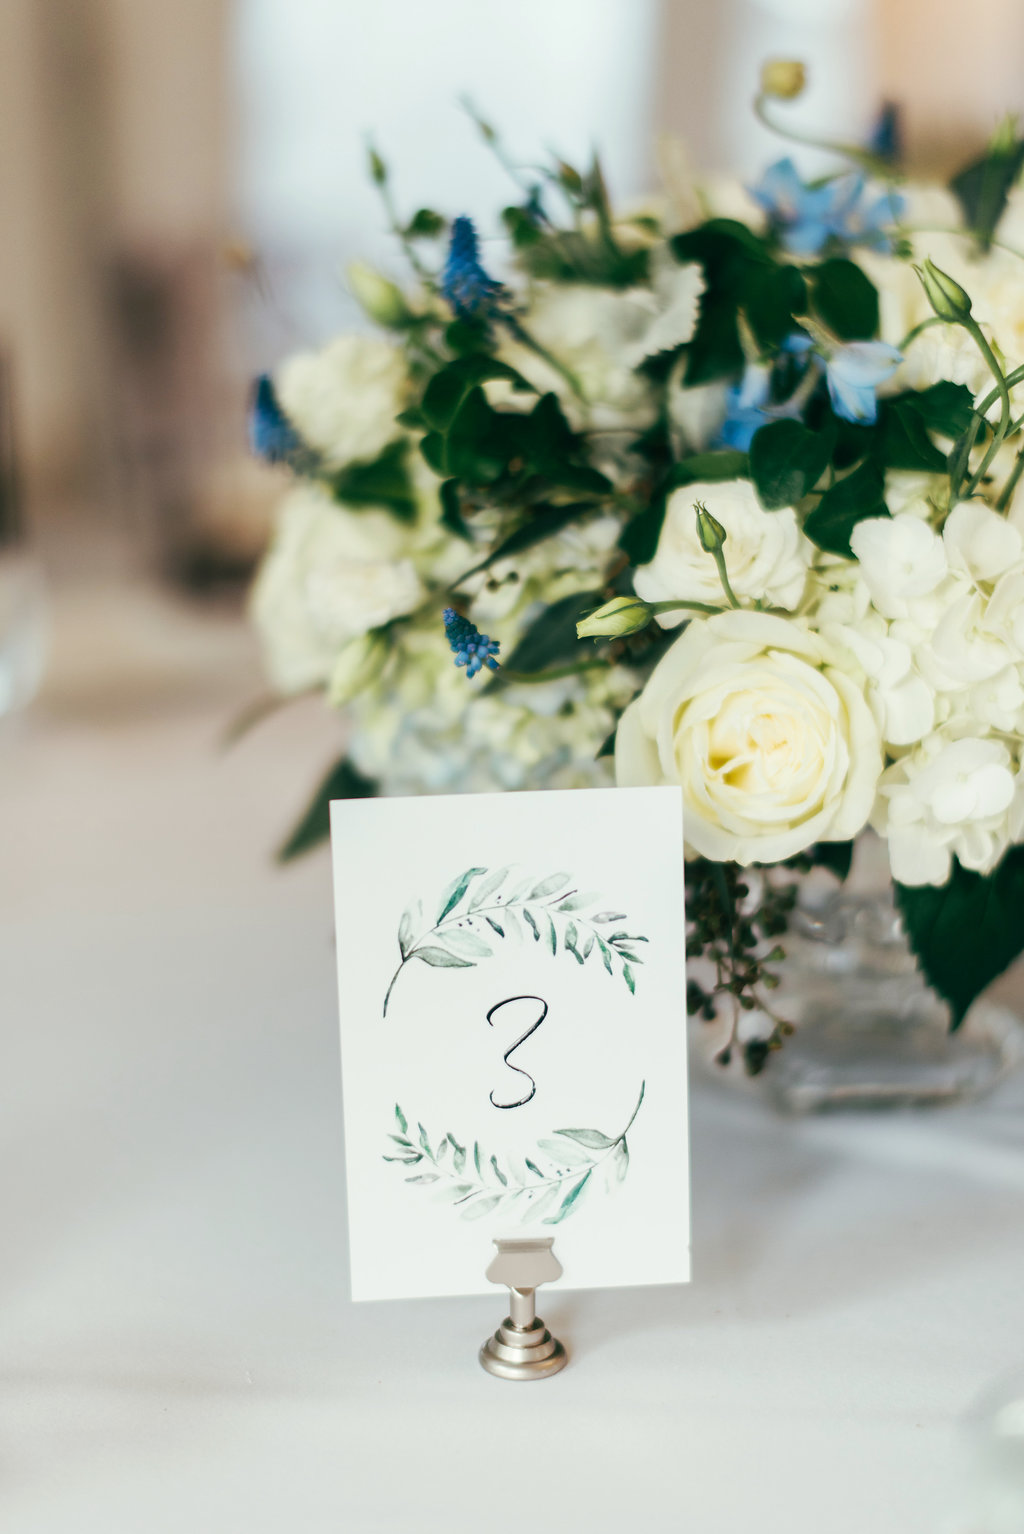  Atelier Ashley Flowers + Woodlawn + Pope Leighhey House + Anna Reynal Photography + DC Weddings + DC Florist + centerpieces + dusty blue and white flowers + dusty blue centerpiece 